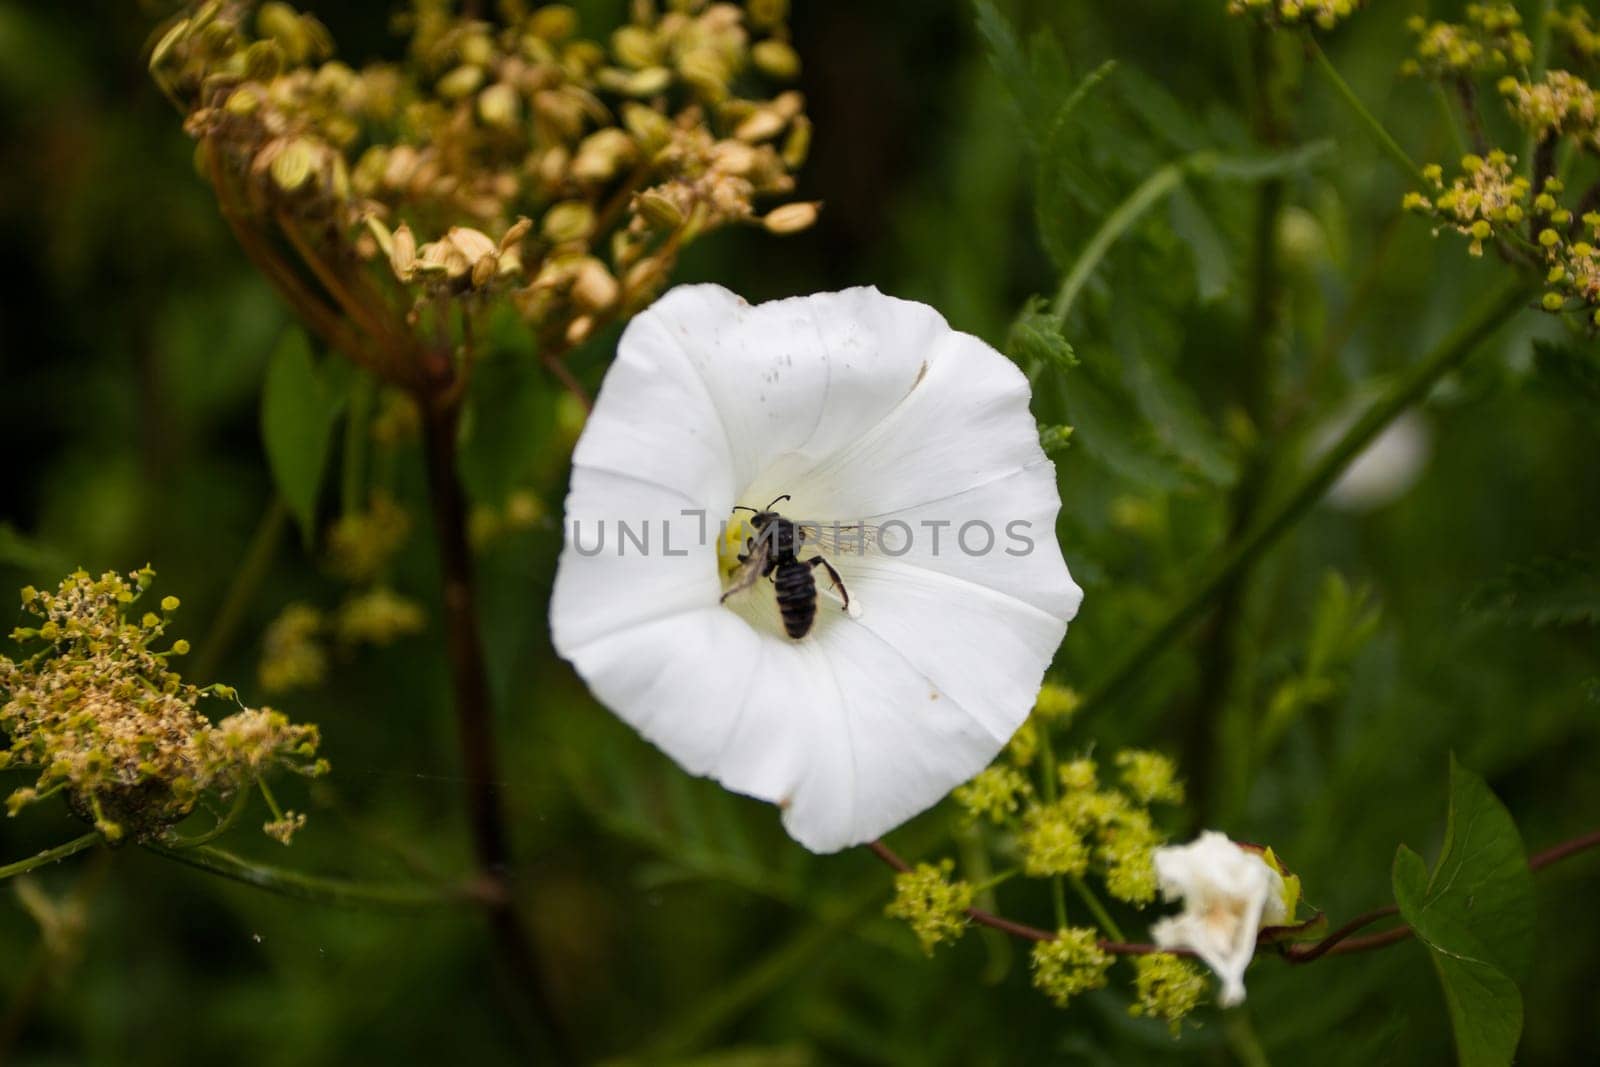 The insect sits in a white flower on a background of greenery and other flowers. Insects and plants.